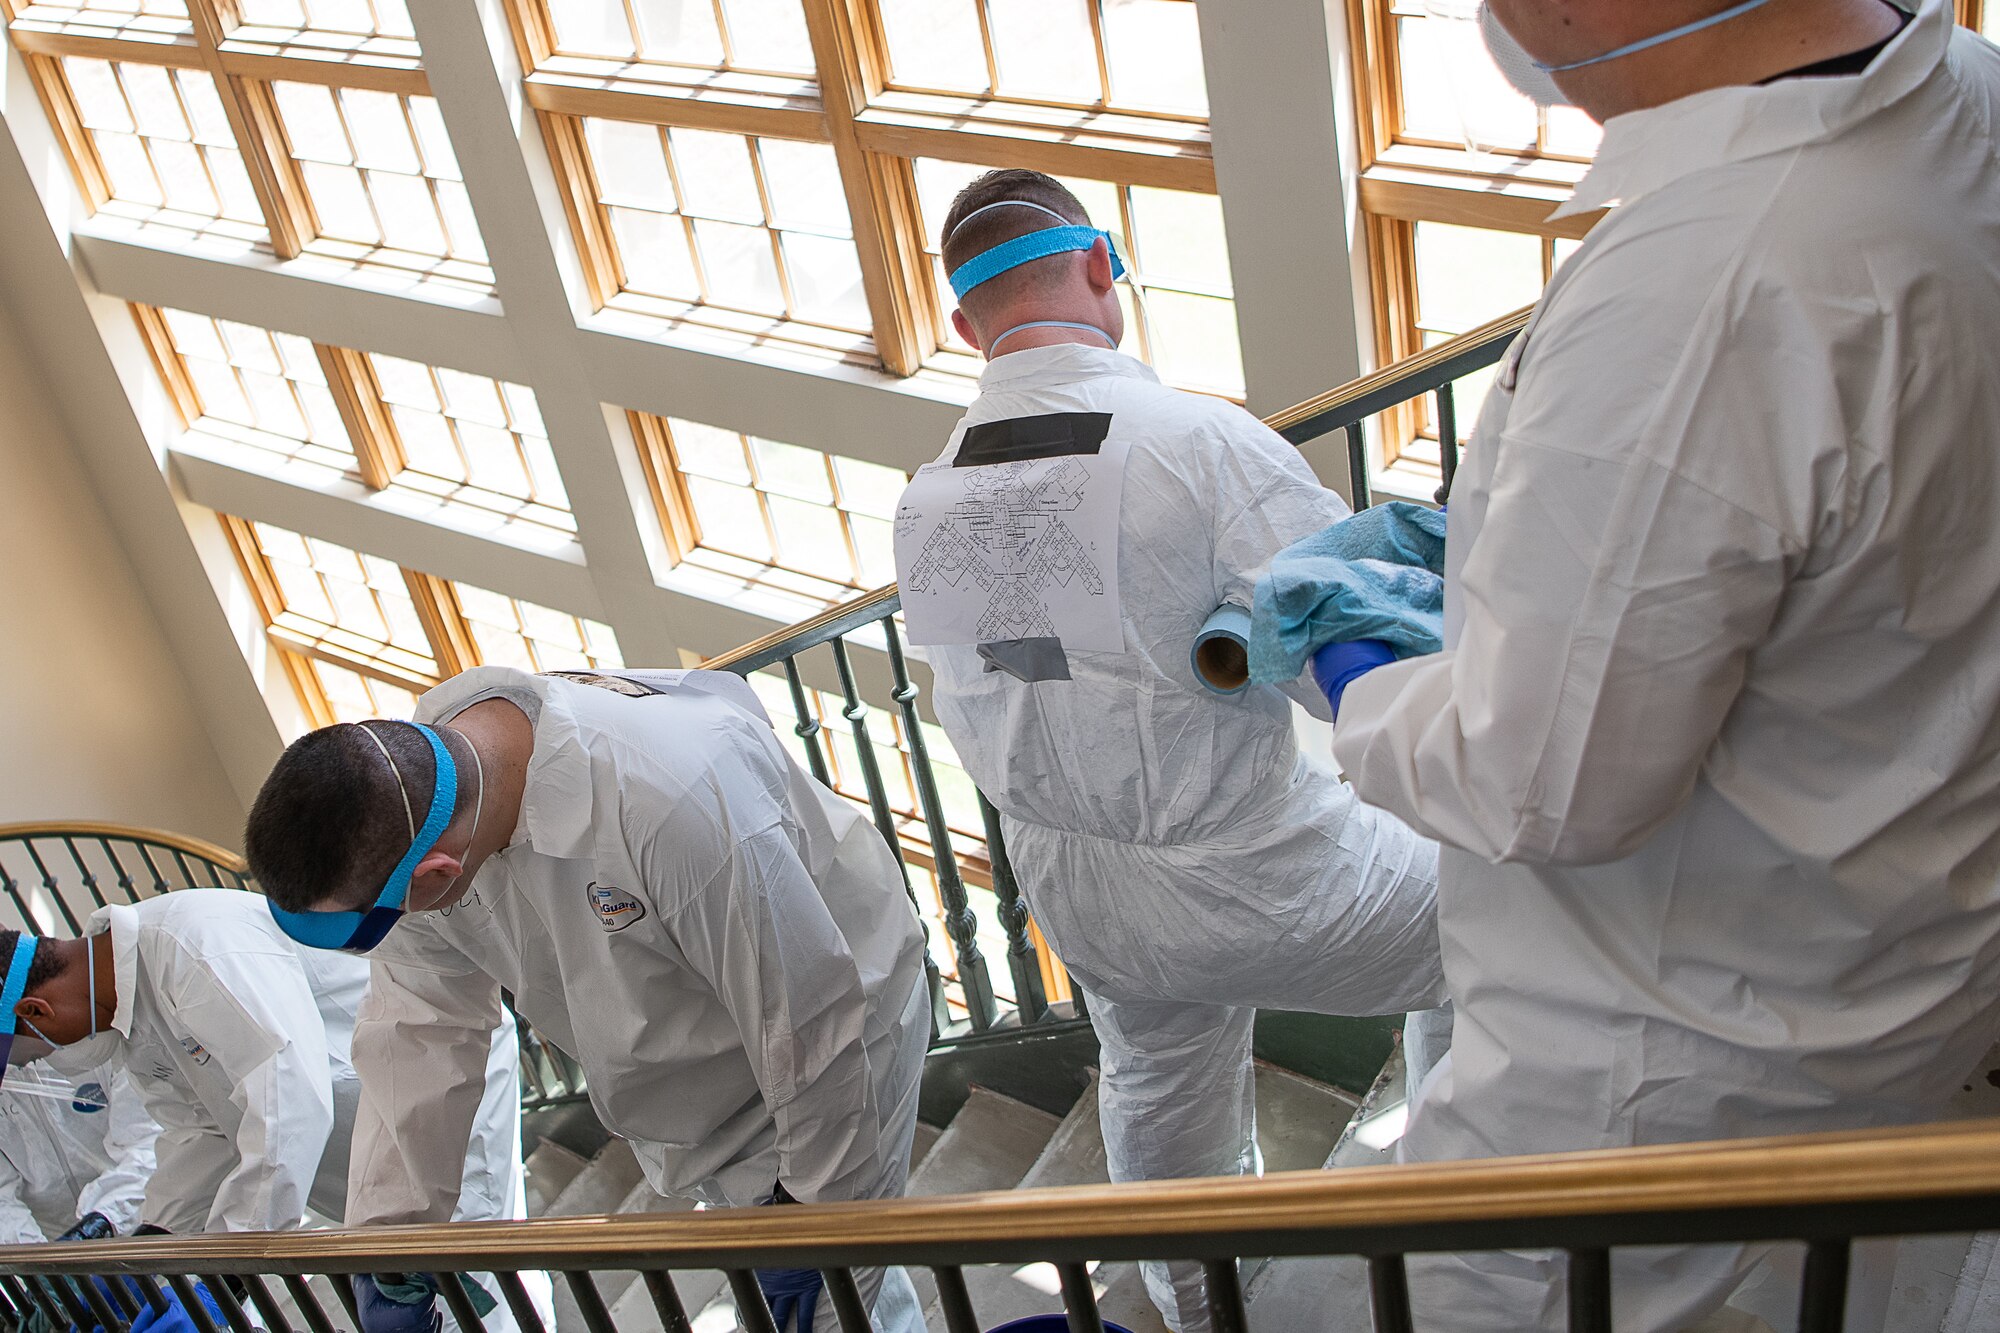 Oklahoma Army and Air National Guardsmen line a stairway as they use Disease Control and Prevention-approved methods to disinfect a stairway of the Norman Veterans Center in Norman, Oklahoma, April 29, 2020. Guardsmen were at the Center to disinfect commonly touched surfaces and high traffic areas including handrails, chair arms, tables, switches and elevator buttons, split up into three teams, in order to more efficiently covering all of the common areas of the 275,000 square-foot facility. Using pressure sprayers and hand sprayers filled with Centers for Disease Control and Prevention-approved disinfectants, the teams worked from the back of the facility to the front. The residents’ military service spans from World War II to Operation Desert Storm. (U.S. Air National Guard photo by Tech. Sgt. Kasey M. Phipps)